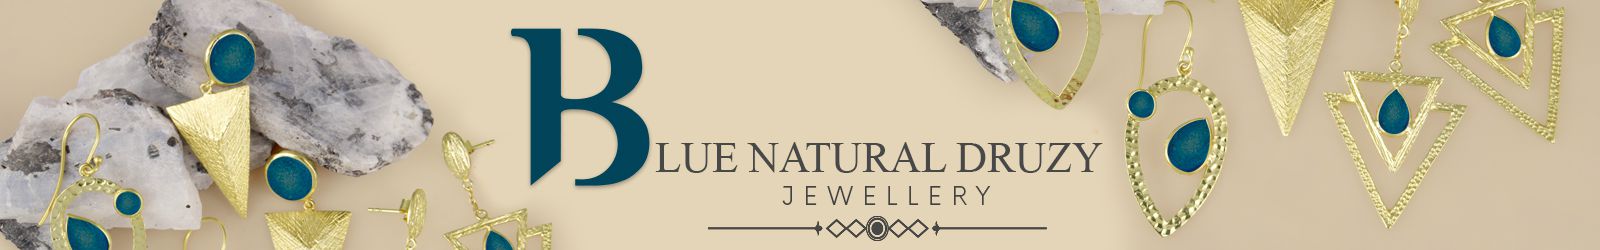 Silver Blue Natural Druzy Jewelry Wholesale Supplier